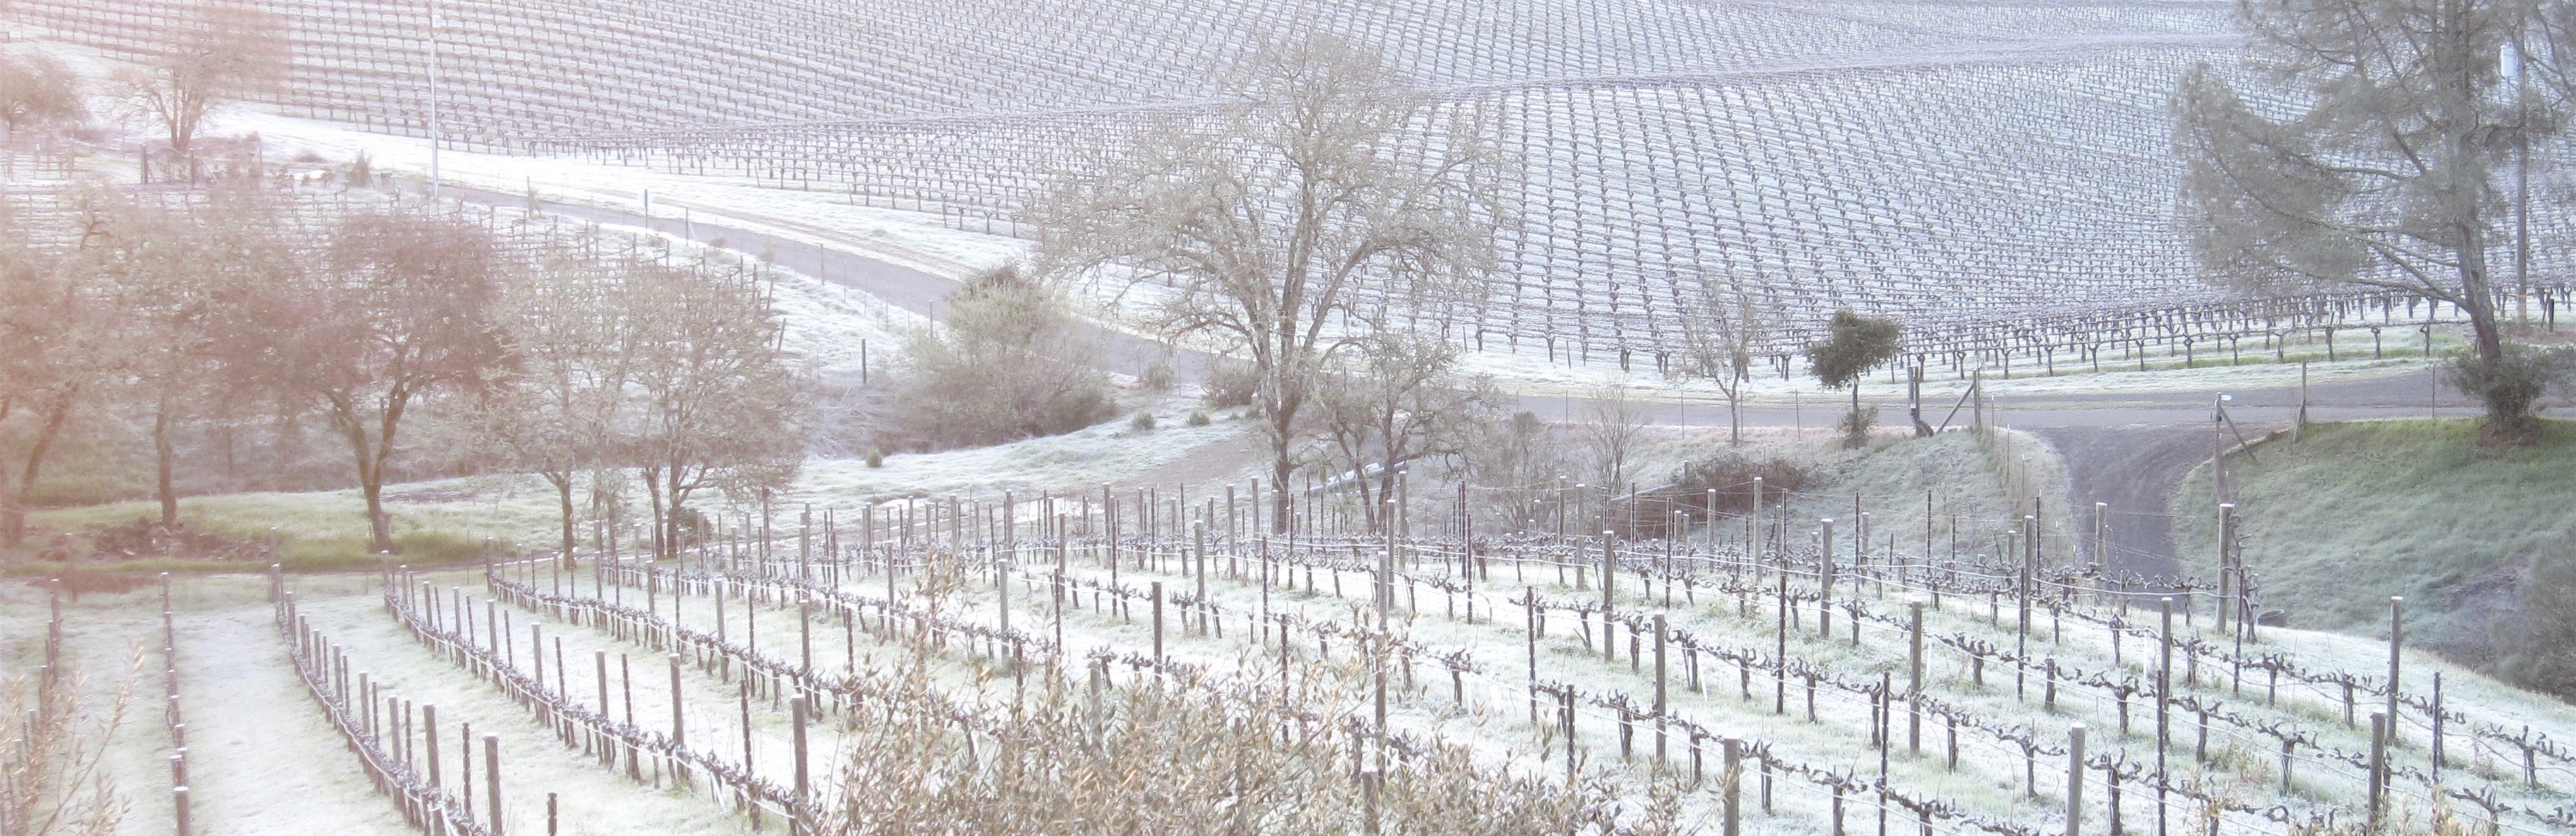 Frost covered vineyards